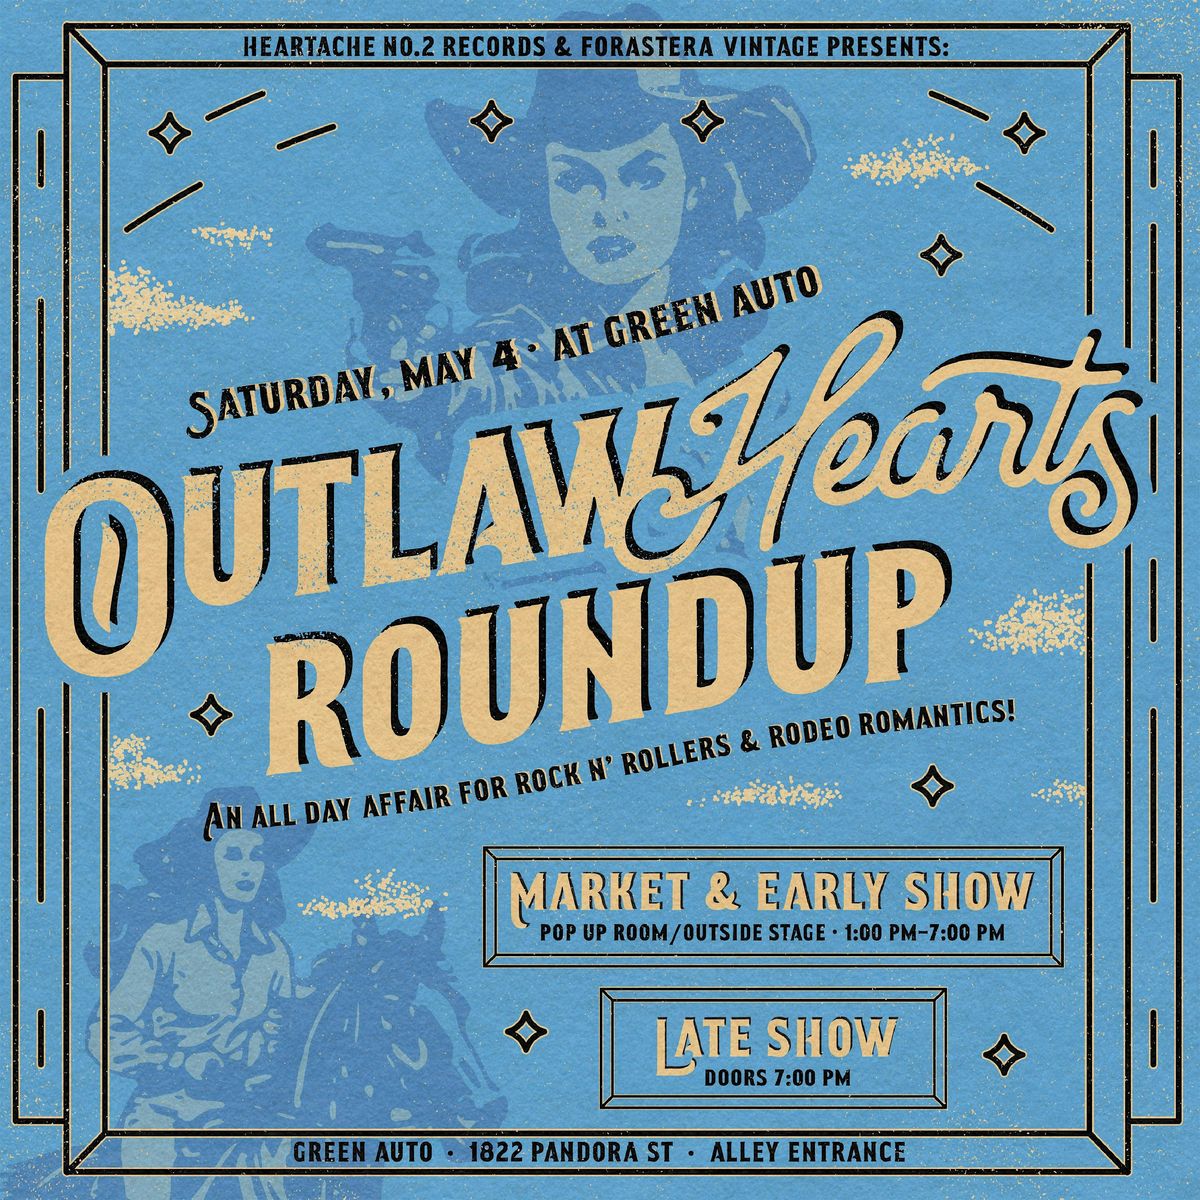 The Outlaw Hearts Roundup